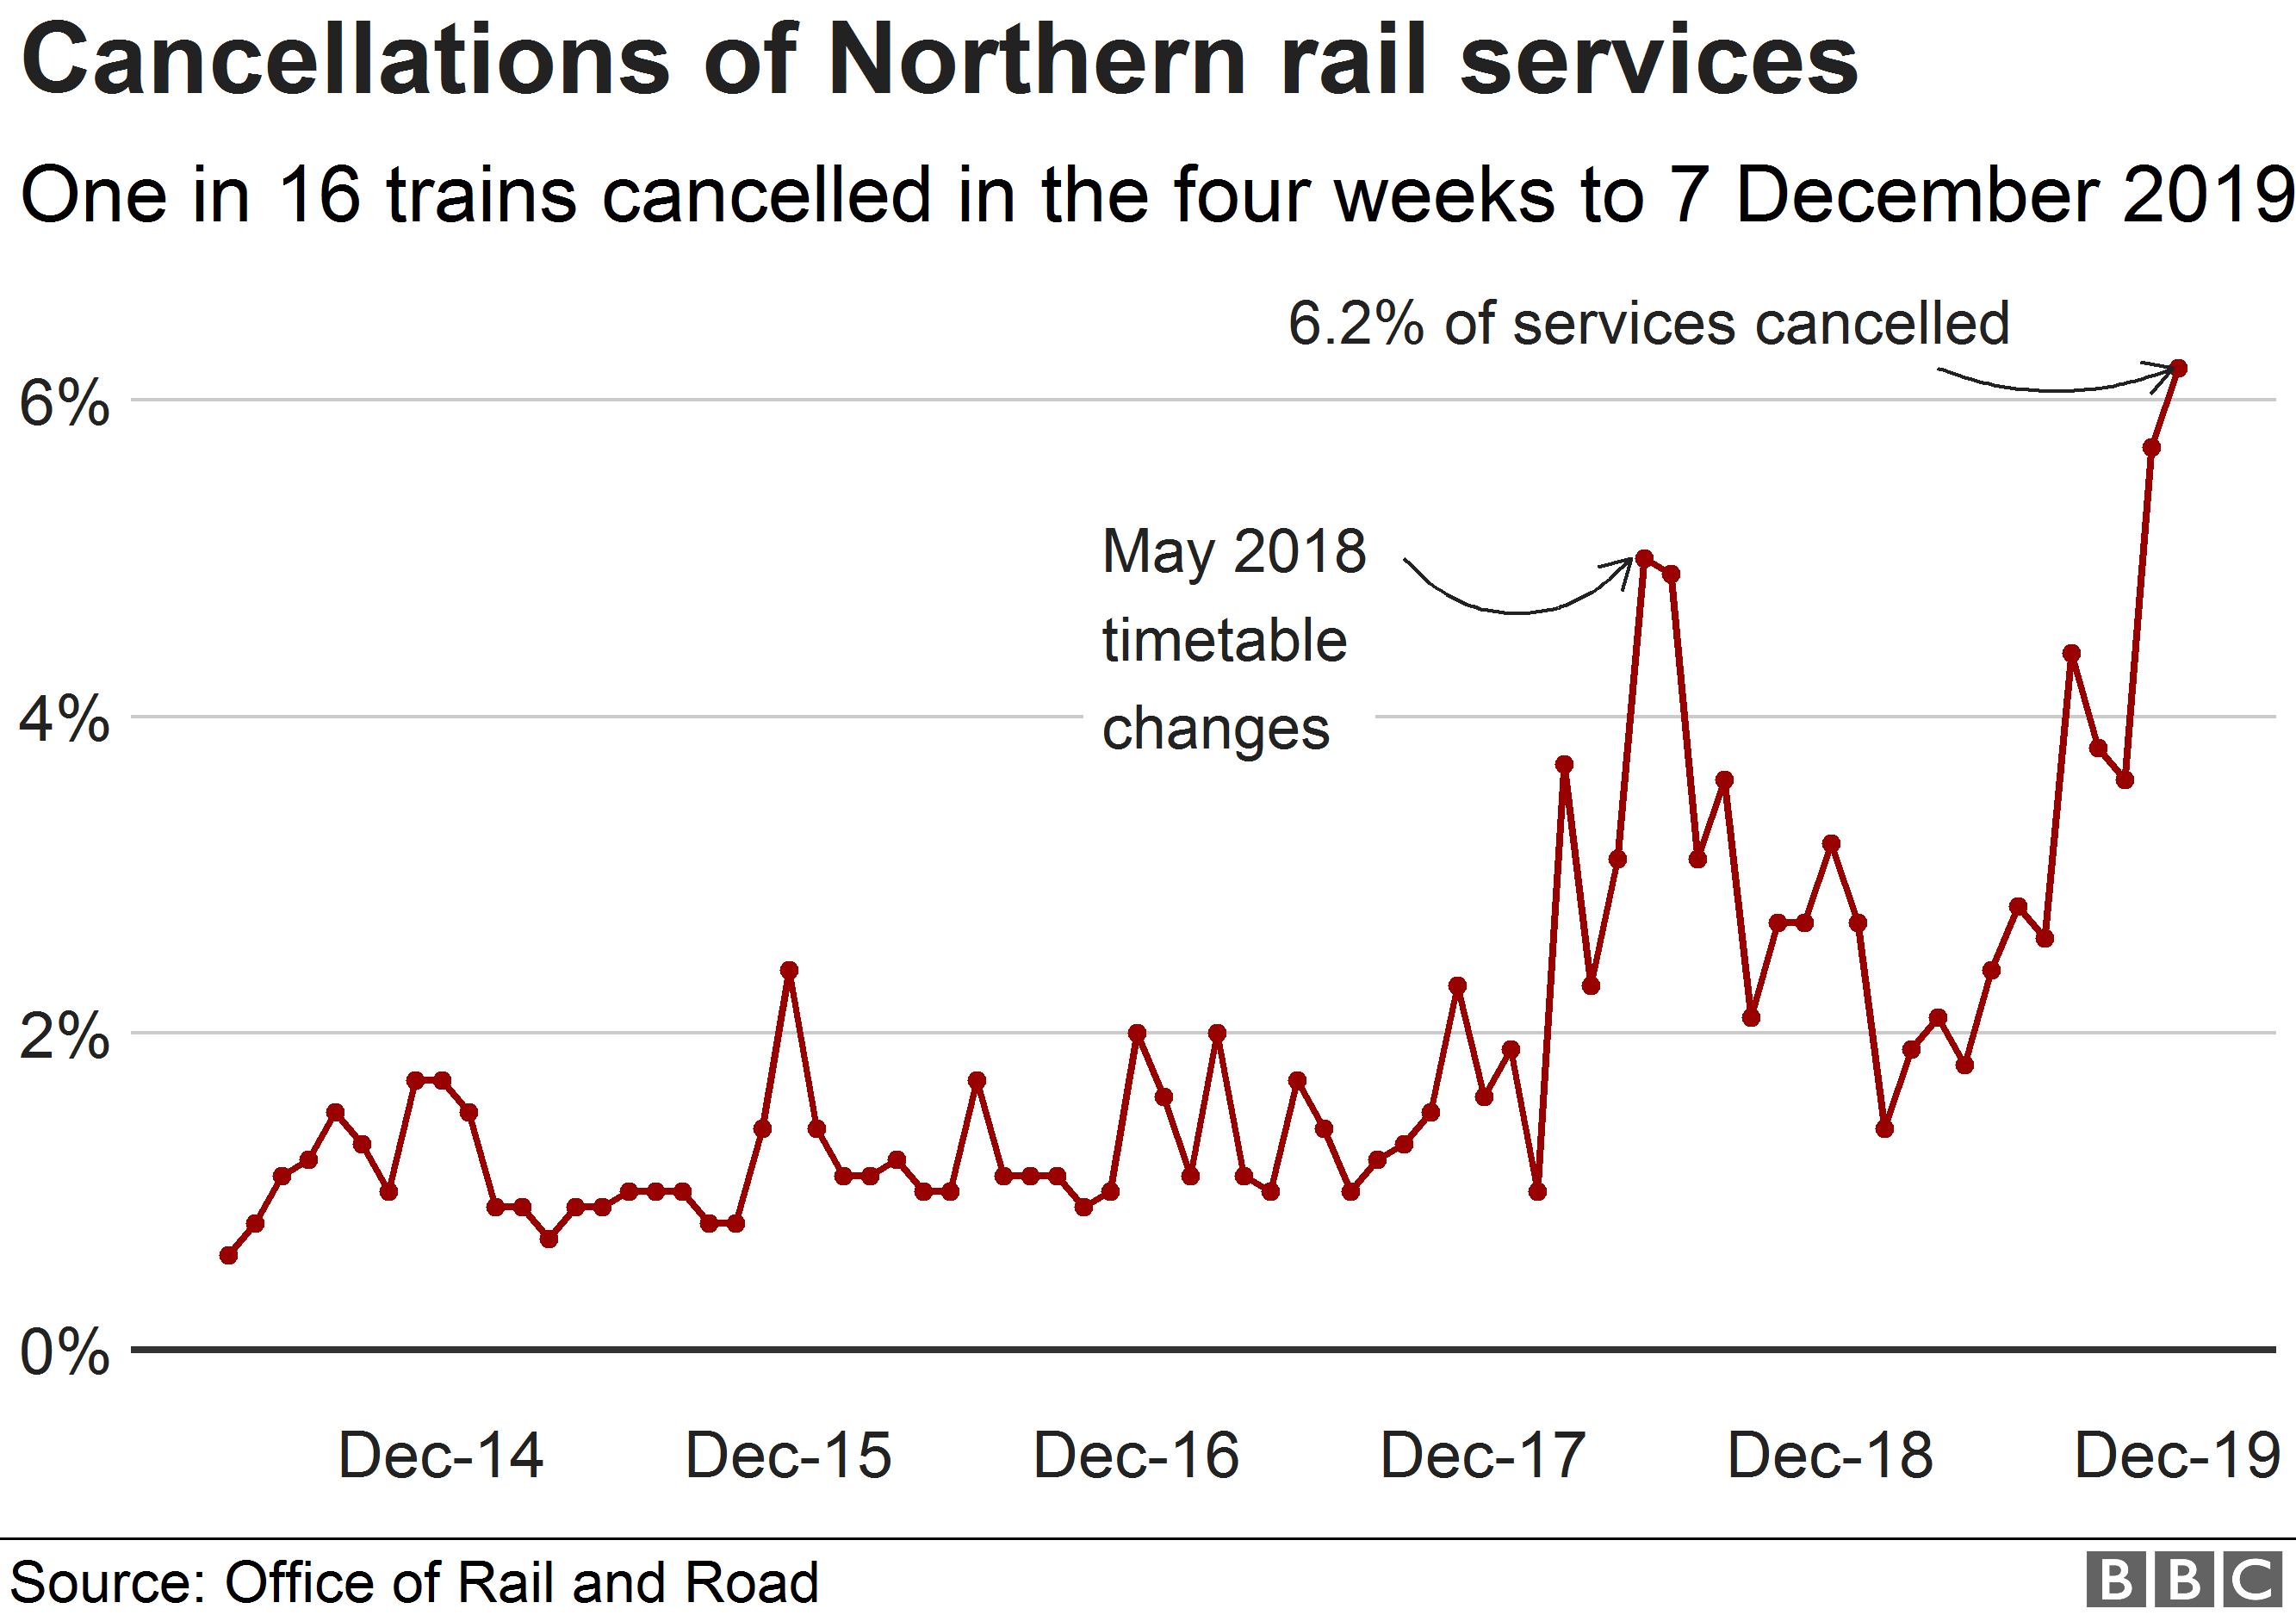 Chart showing the proportion of Northern train services that are cancelled each month